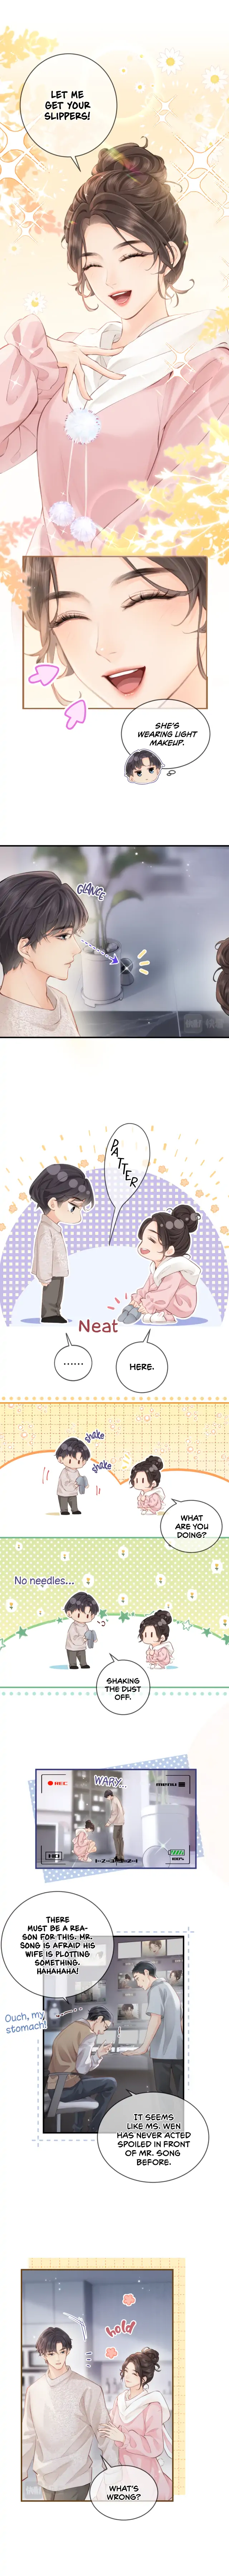 The Top Couple Is a Bit Sweet chapter 7